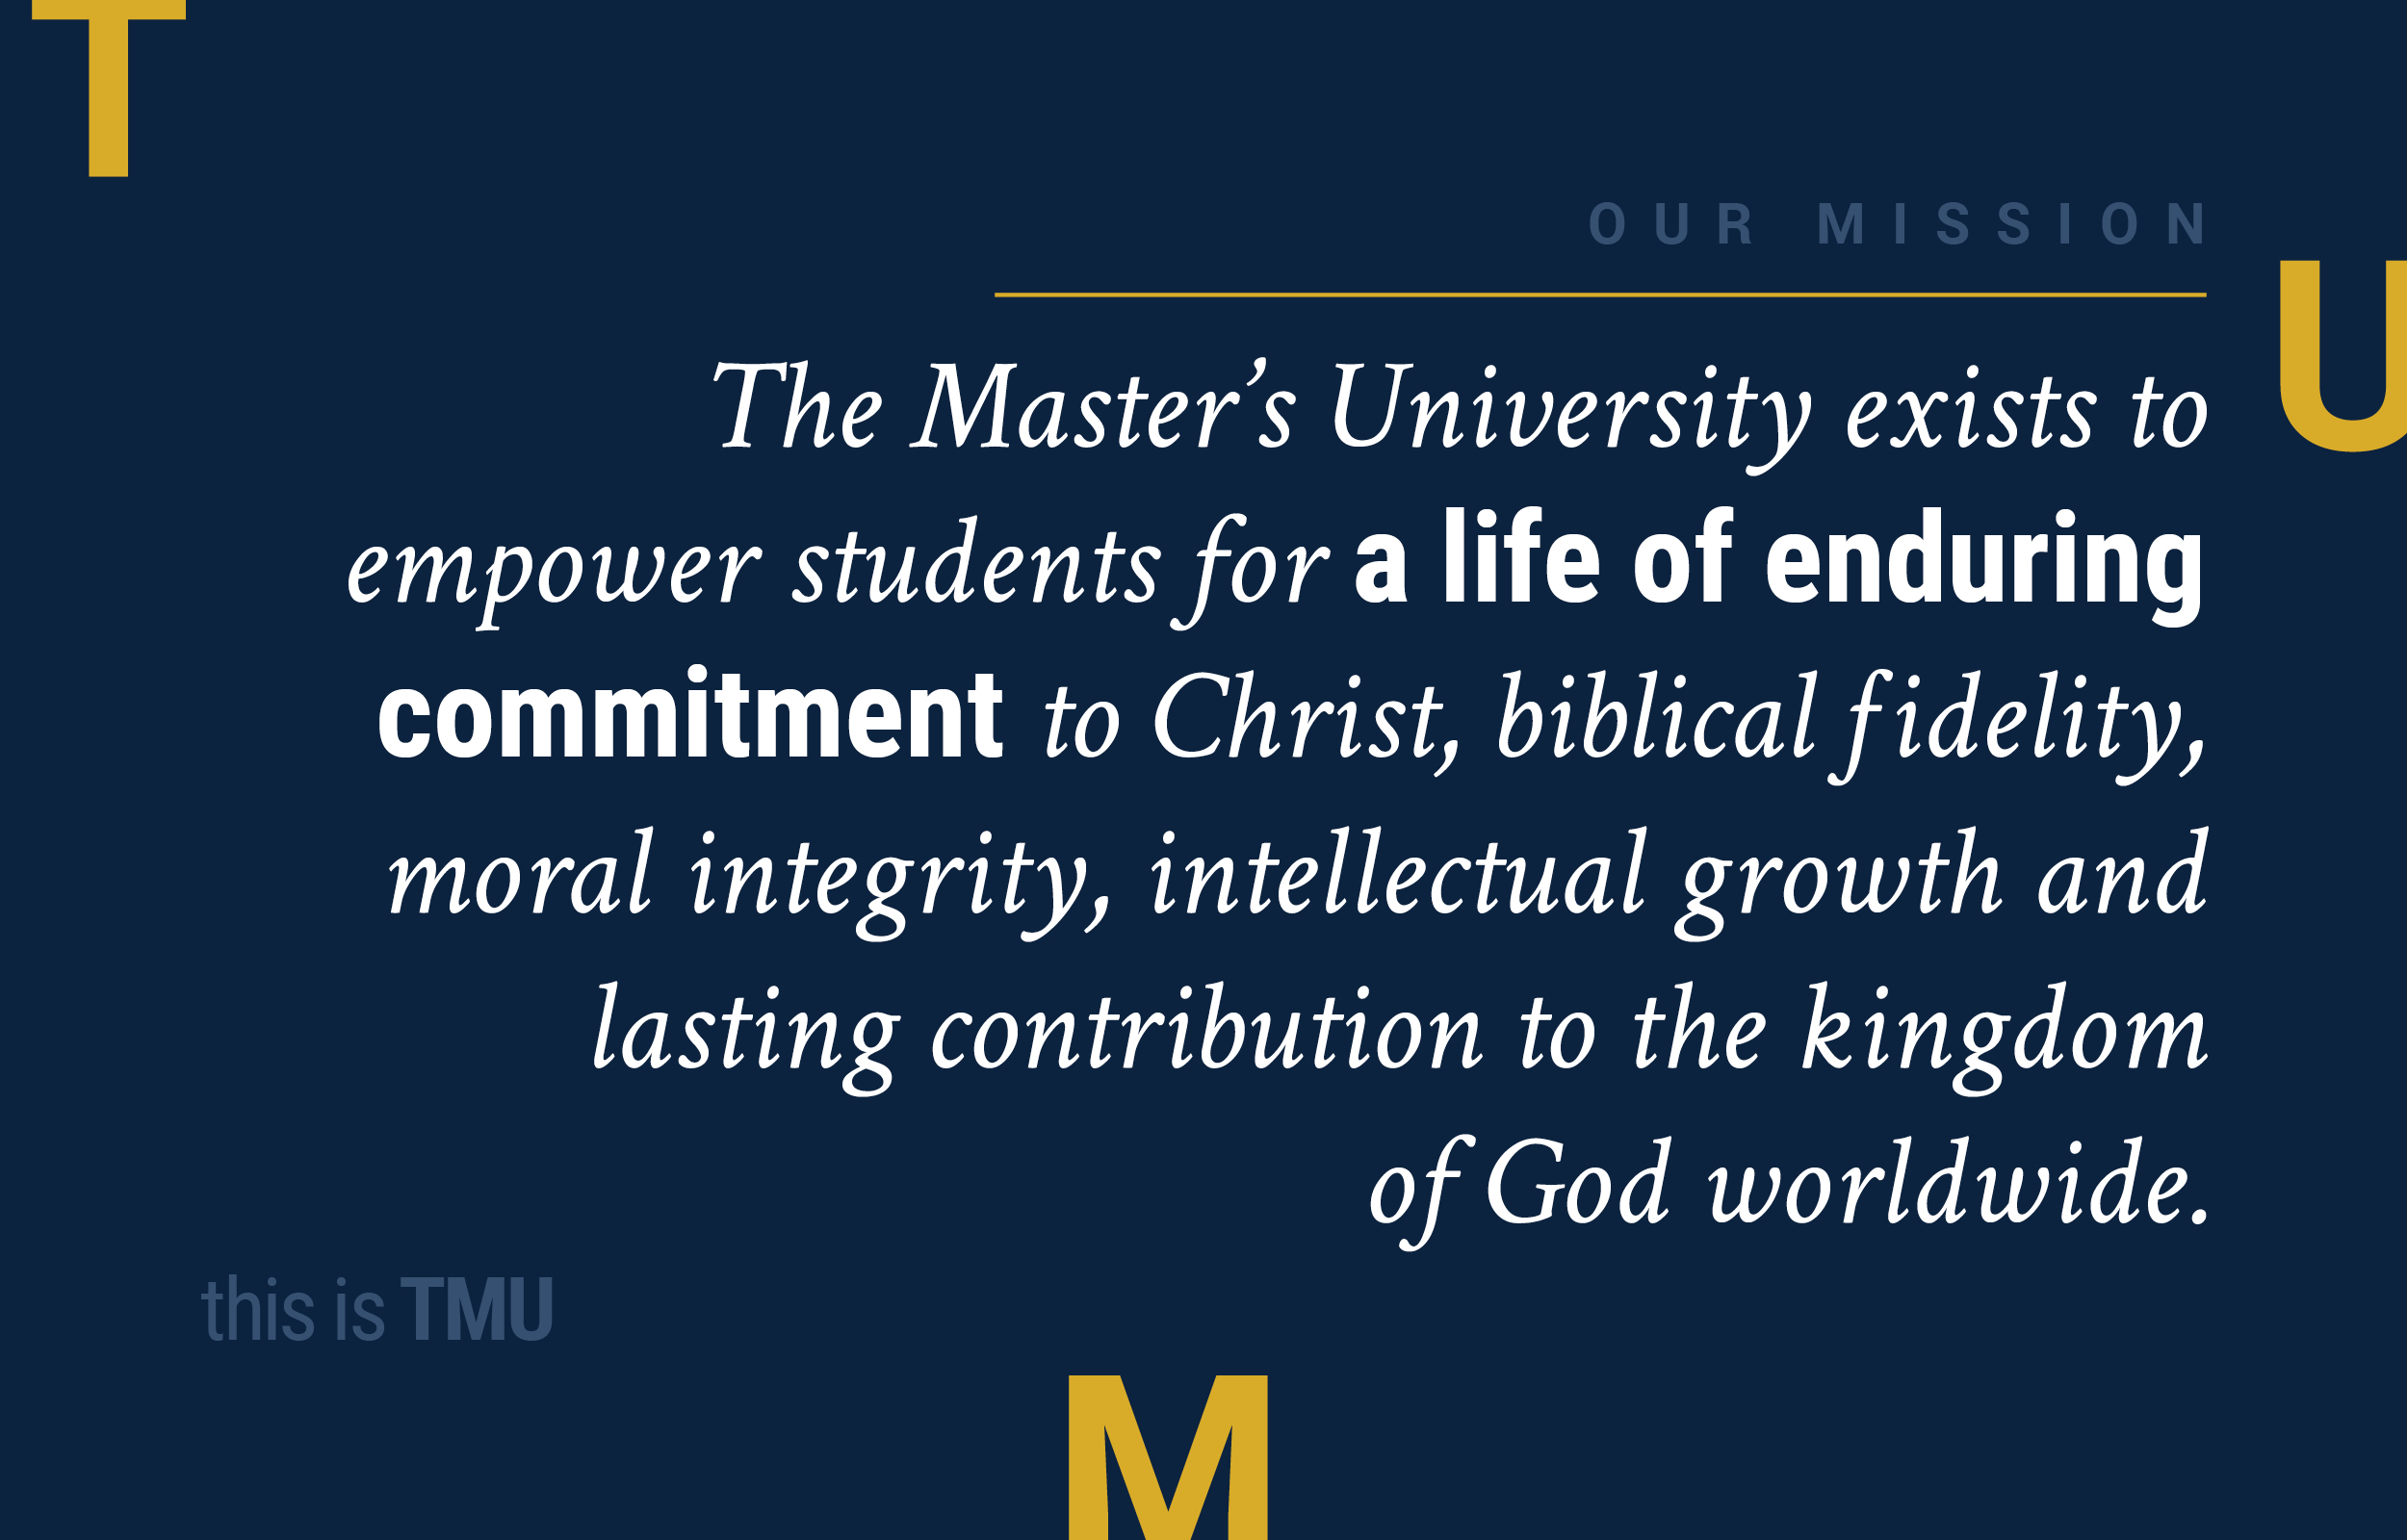 This is TMU: Our Mission